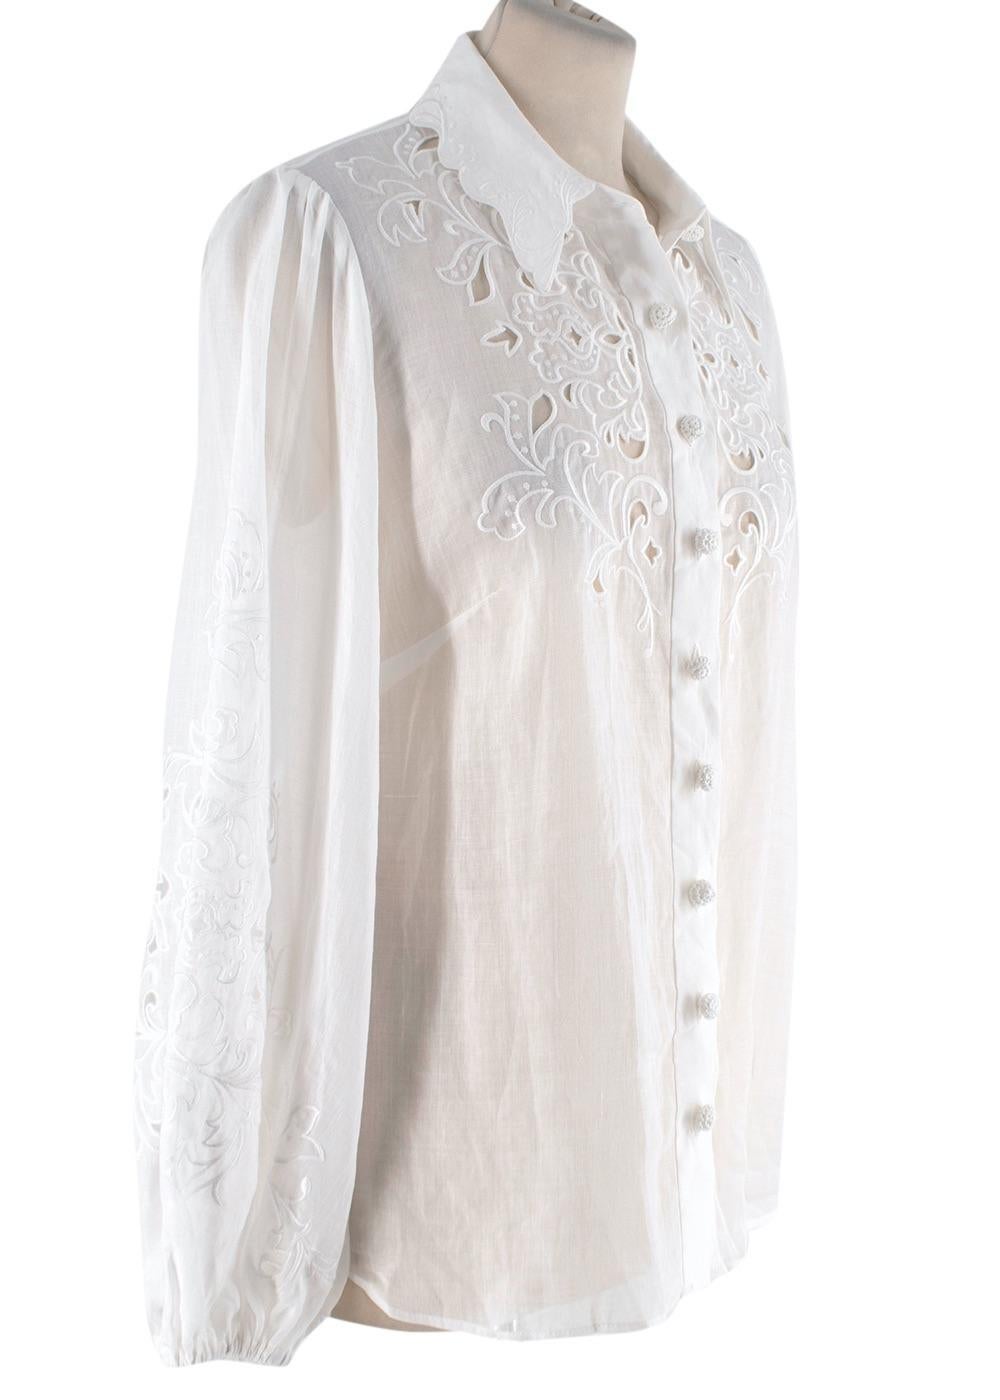 Zimmermann Ivory Linen Embroidered Nina Shorts & Blouse

- Classic collar blouse with cut work applique across the chest, and embroidery work over the scalloped collar, and balloon sleeves
- Decorative knotted buttons
- High rise tailored shorts